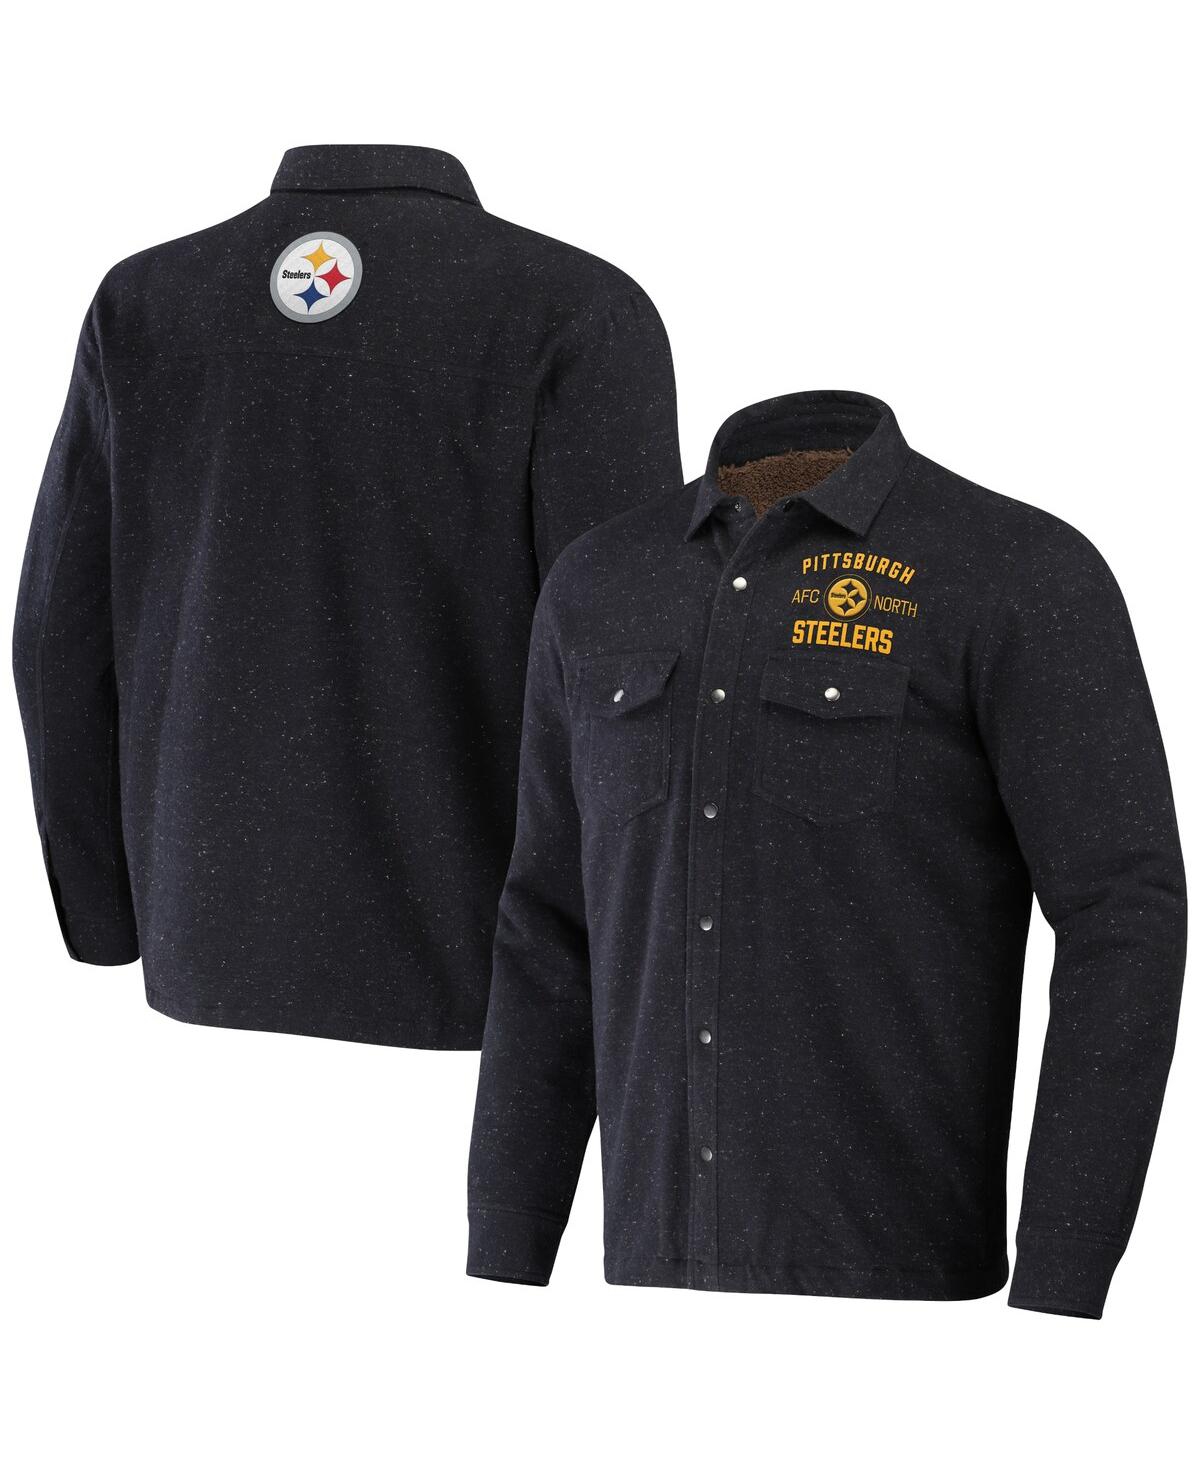 Men's Nfl x Darius Rucker Collection by Fanatics Charcoal Pittsburgh Steelers Shacket Full-Snap Jacket - Charcoal